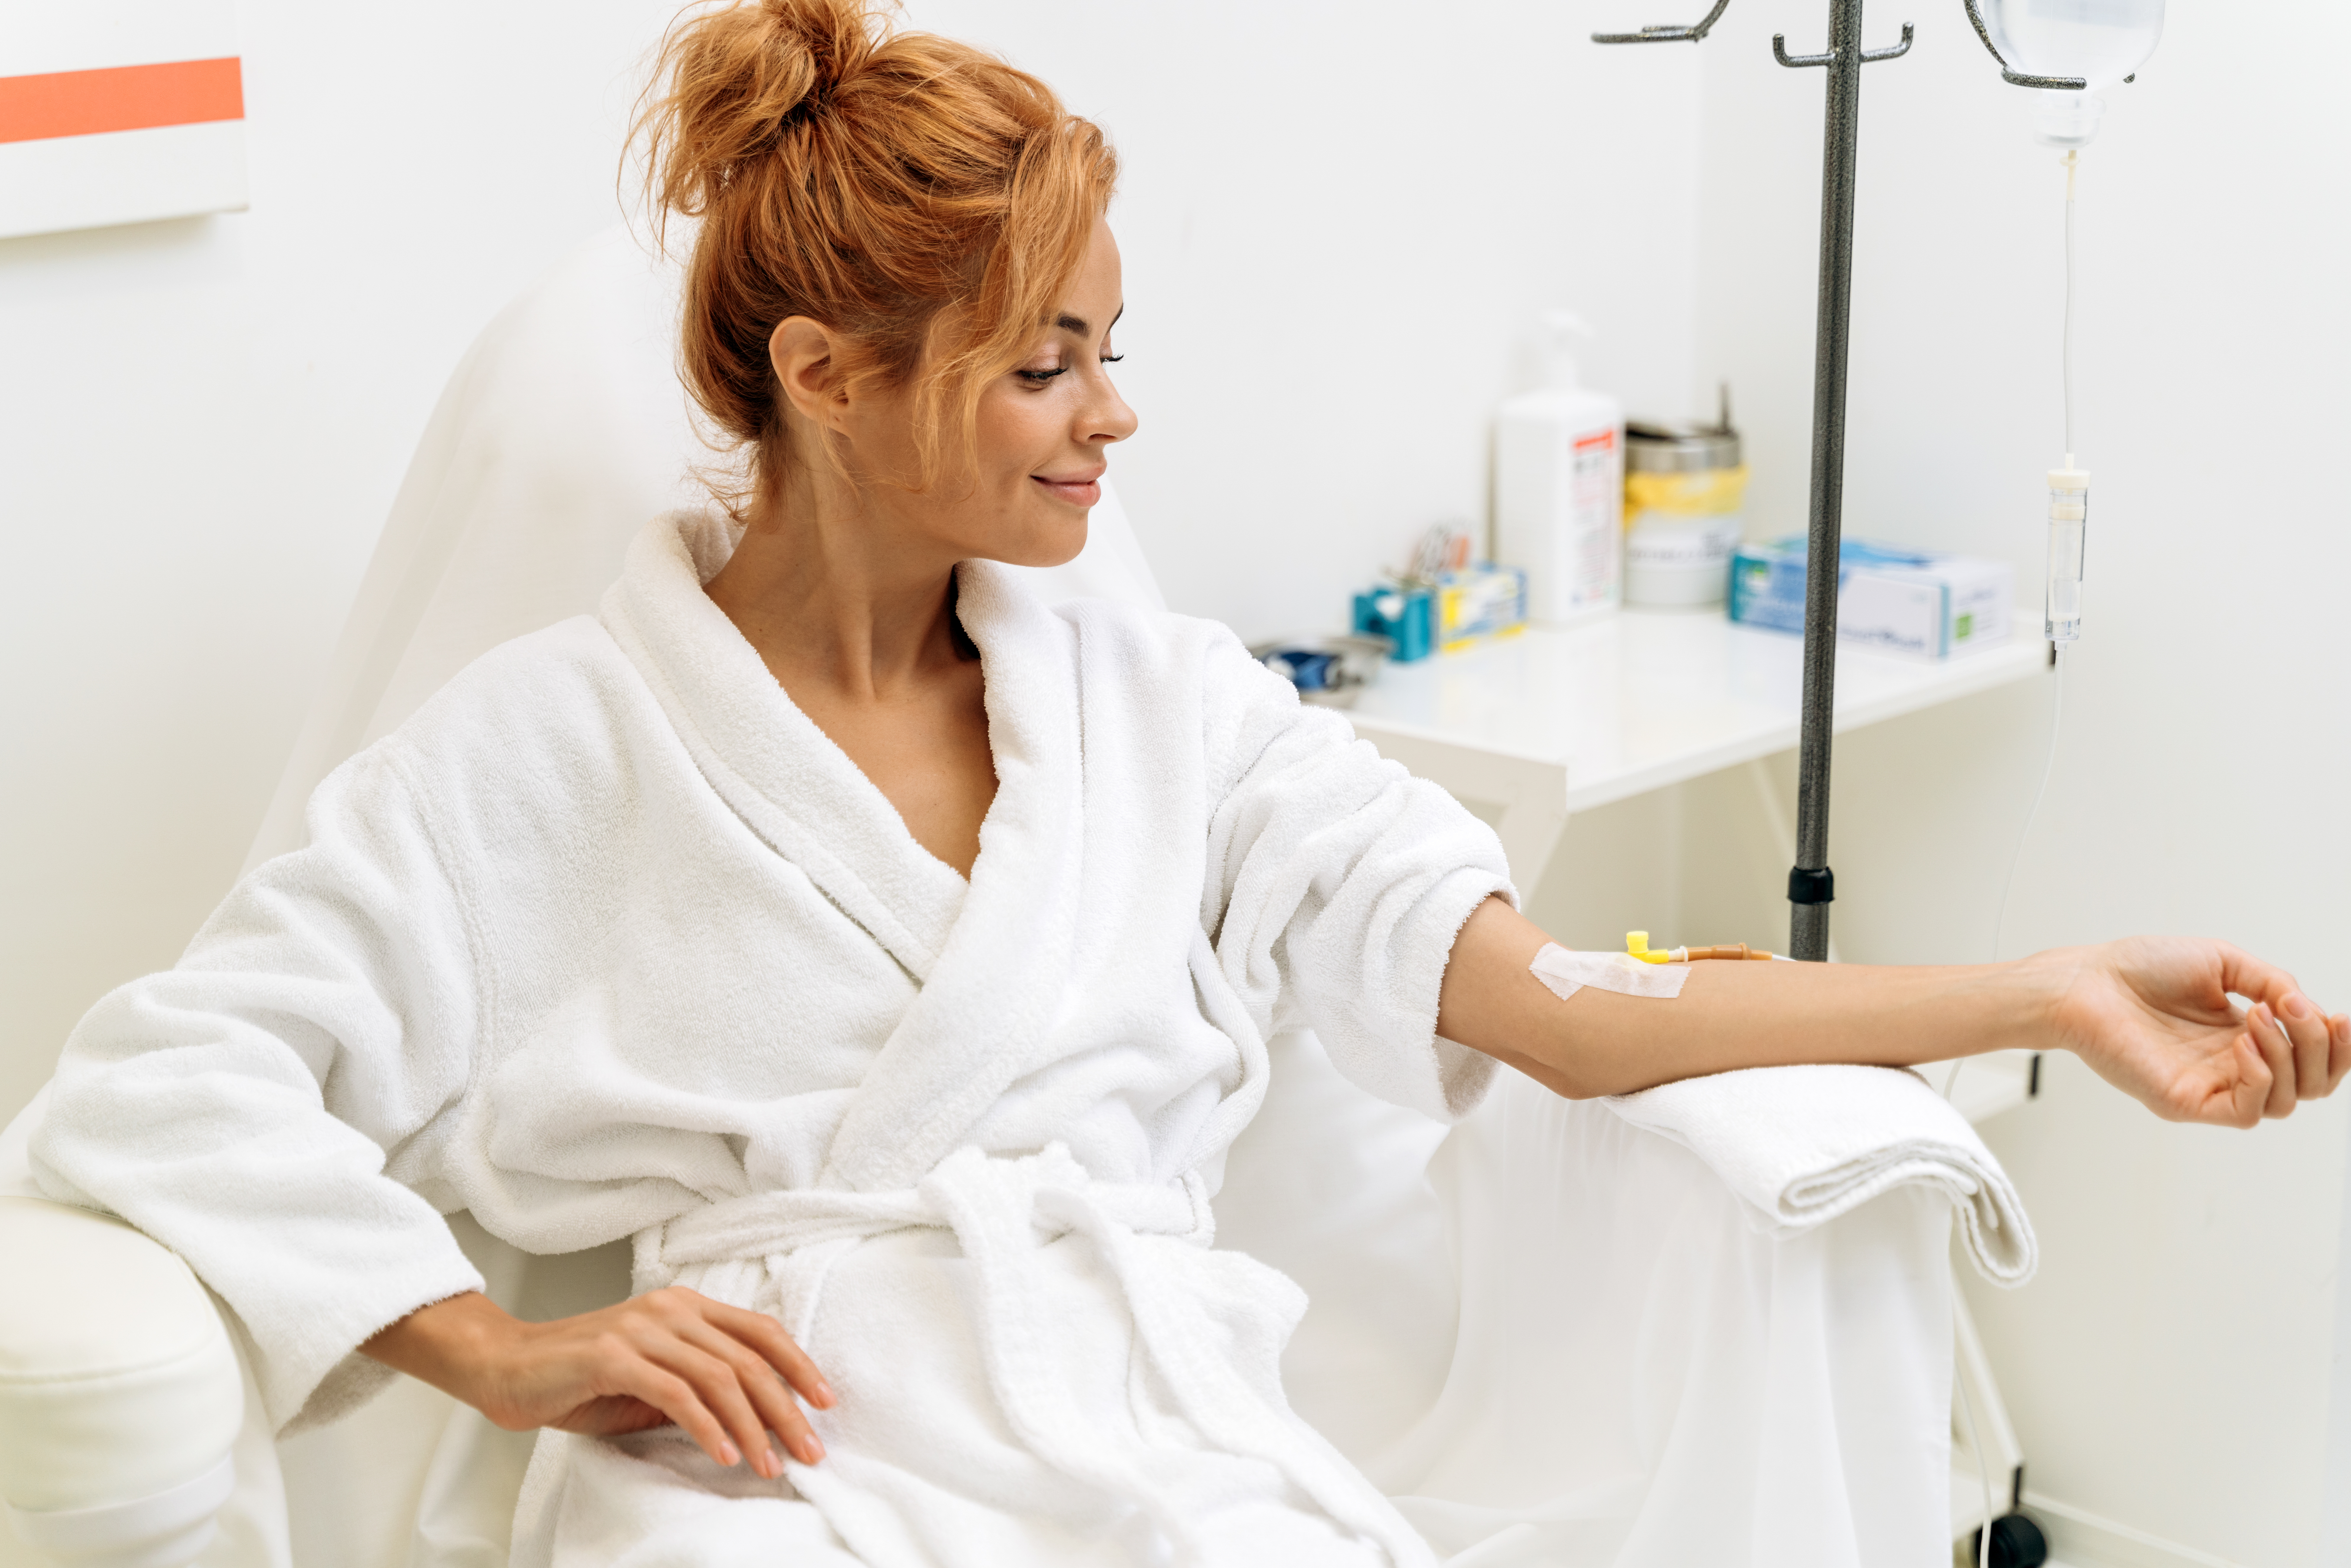 A woman with her hair up in a bun, wearing a white bathrobe, is seated comfortably and smiling while receiving an IV treatment. The IV stand and drip are to her right, and she appears relaxed and content in a clean, well-lit clinical setting.